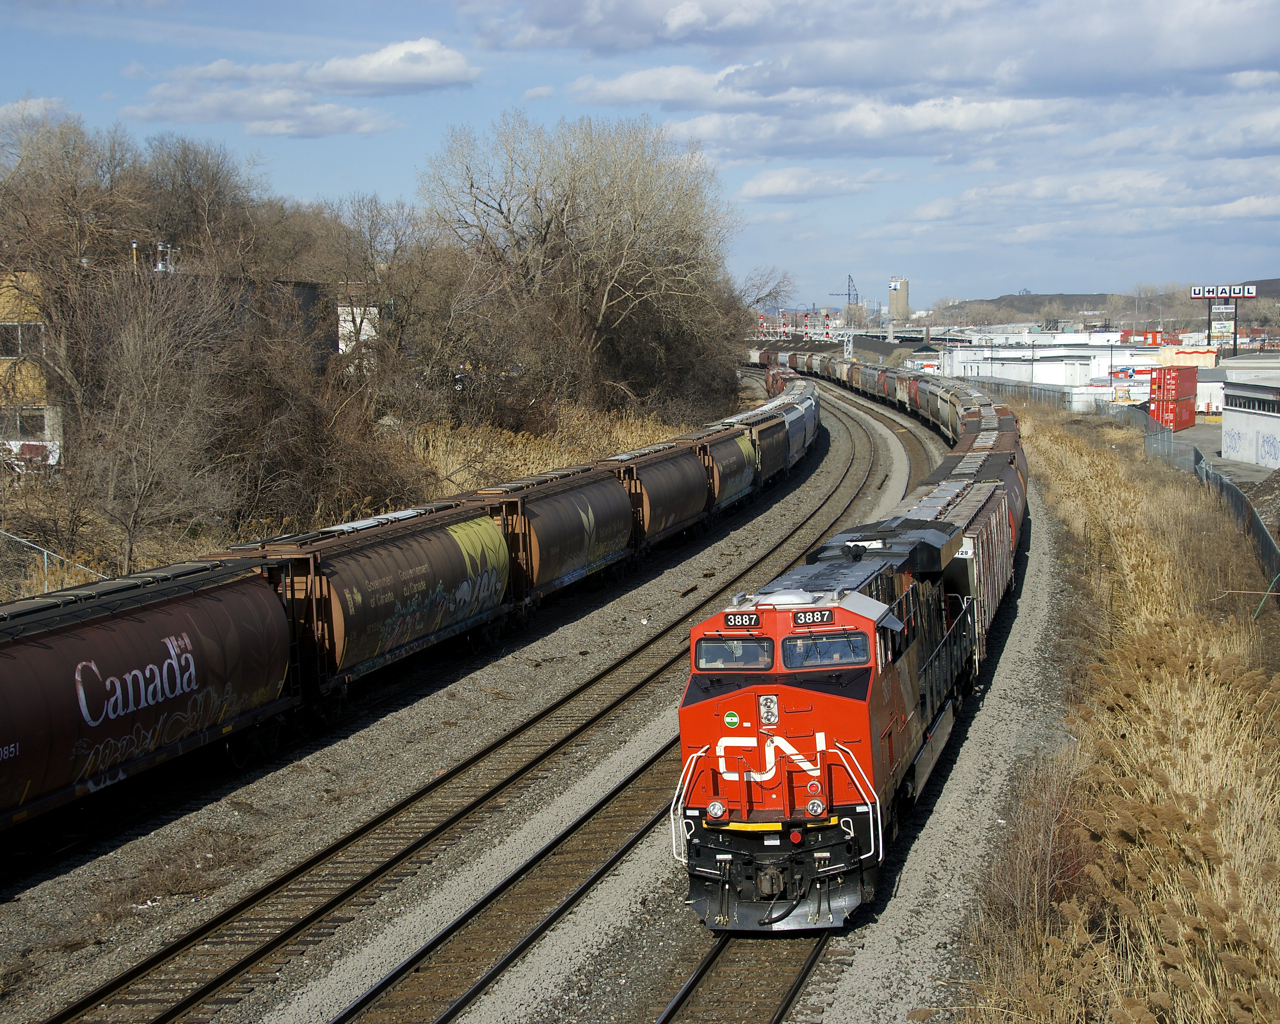 Shiney CN 3887 brings up the rear of grain train CN 874, which is leaving Turcot Ouest after changing crews there. At left grain cars are stored on the transfer track.